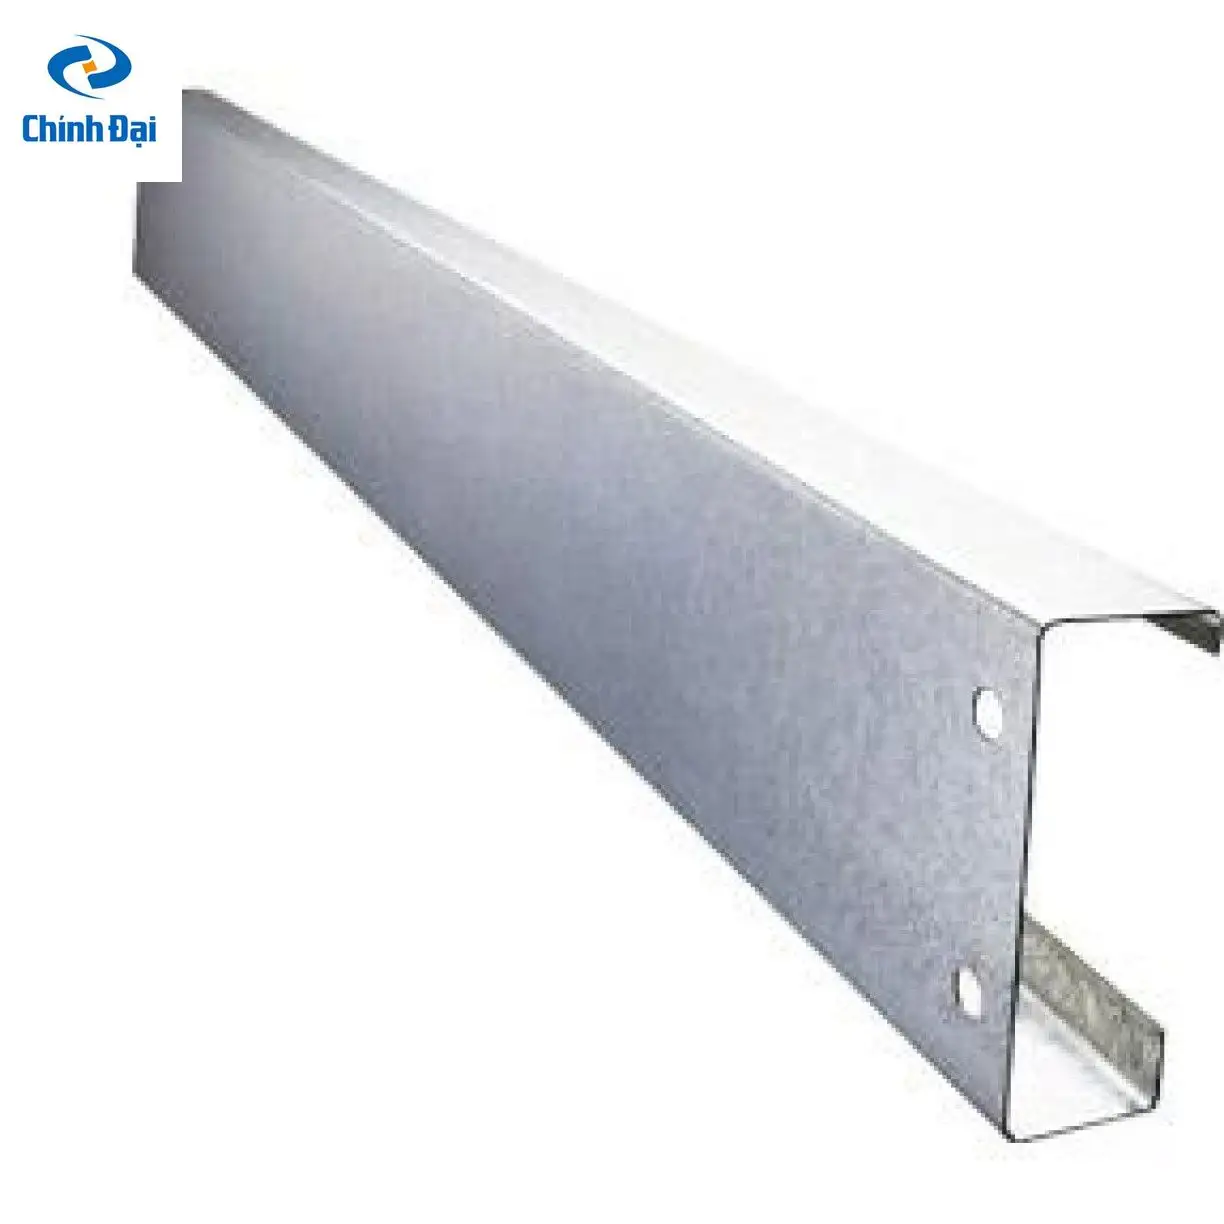 C Channel - ASTM A500 Standard - Building Material